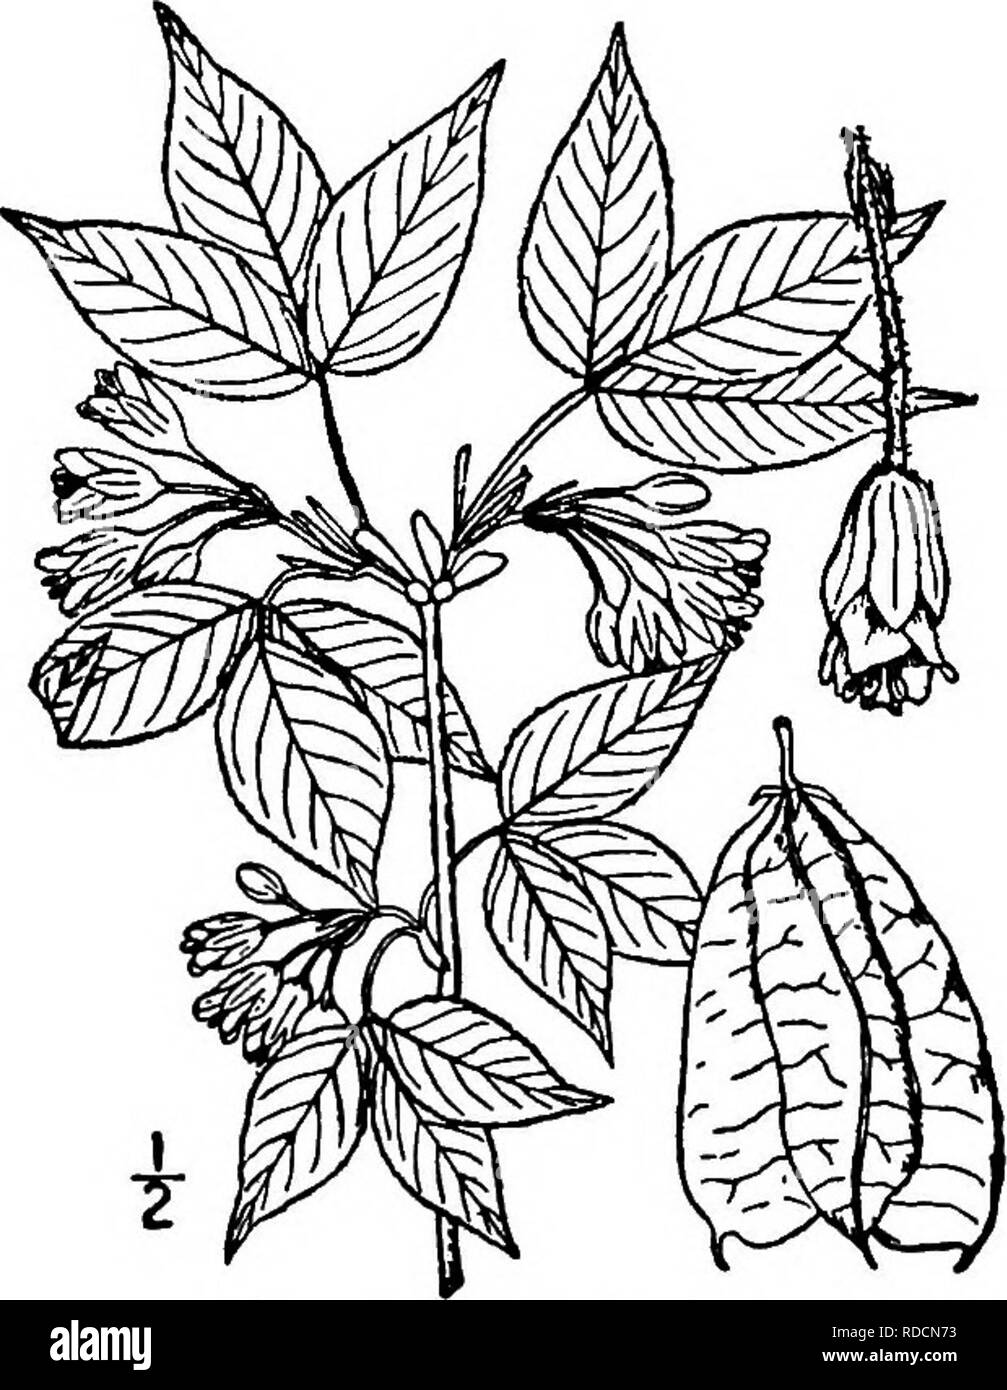 . North American trees : being descriptions and illustrations of the trees growing independently of cultivation in North America, north of Mexico and the West Indies . Trees. Bladdernut 637 shaped flowers are in axillary drooping panicles 5 to 10 cm. long, white and rather showy; the pedicels are jointed at or above the middle, 8 to 12 mm. long; the 5 sepals are lanceolate to oblong, 7 to 10 mm. long, blunt and smooth; the 5 petals are spatulate, slightly longer than the calyx; stamens 5, their filaments about equal. Fig. 587. — Bladdernut. in length to the petals and haiiy. The fruit is a dry Stock Photo